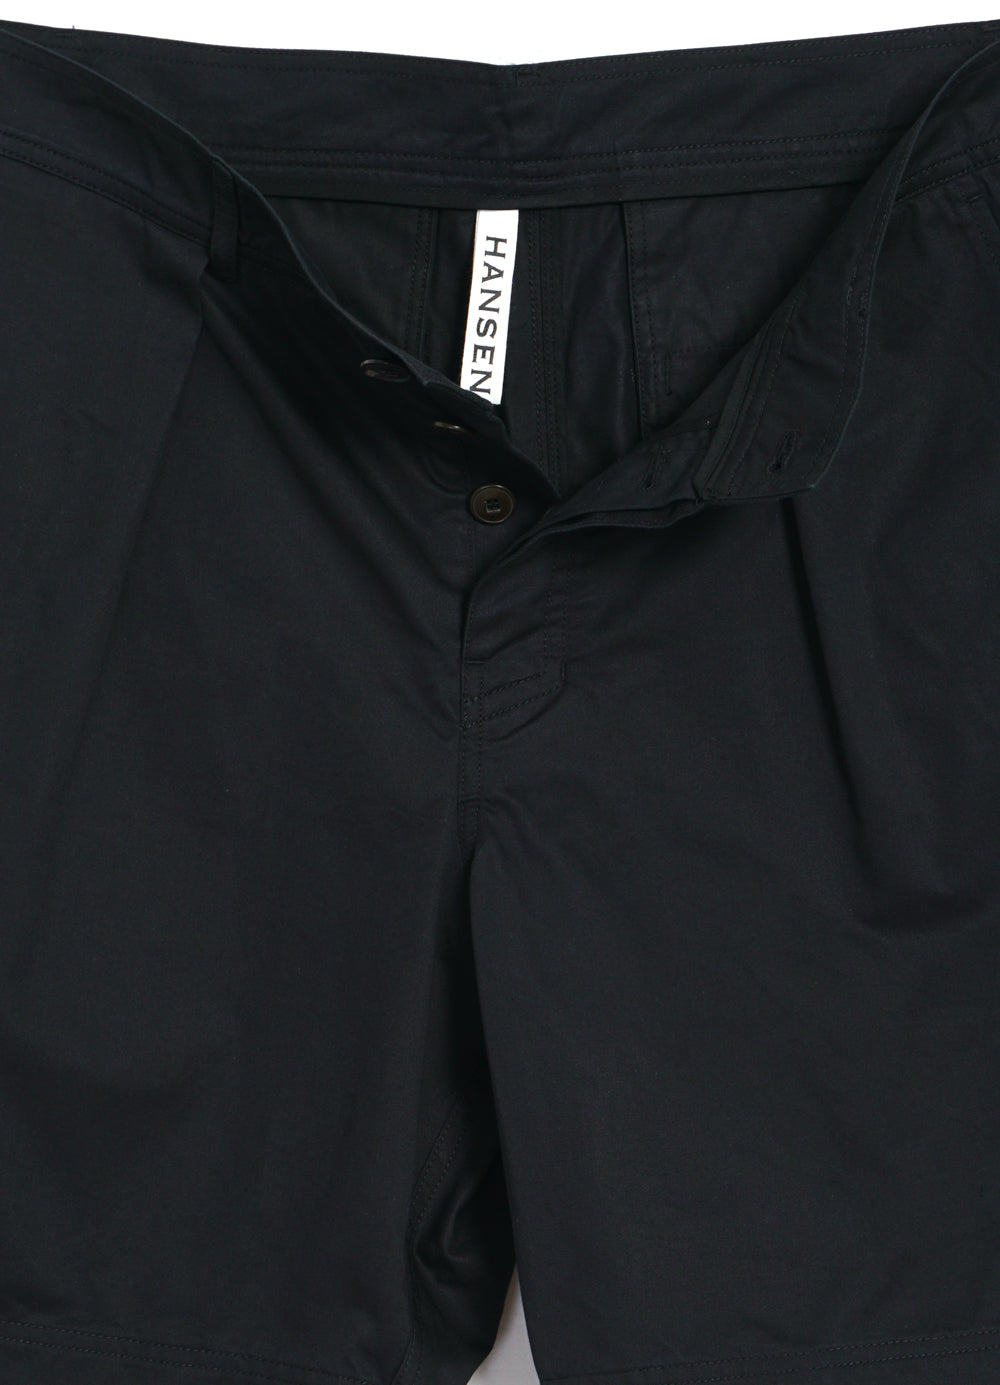 KAARE | Wide Pleated Shorts | Black Drill